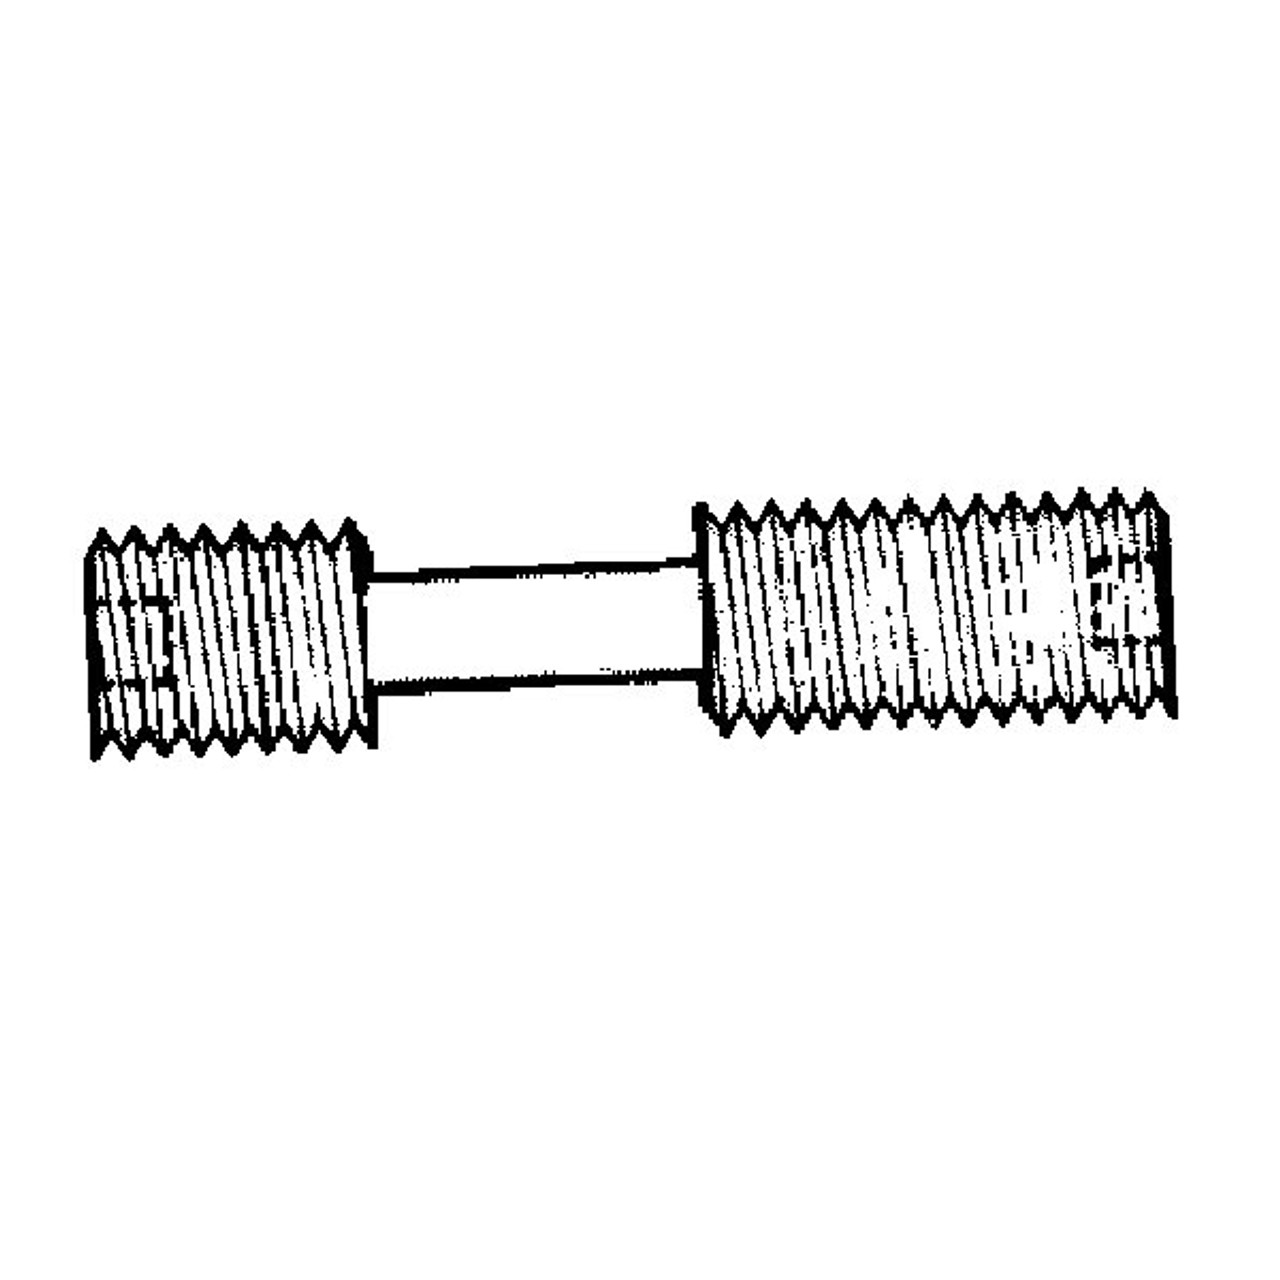 55-920-111      XNS35 DIFFERENTIAL SCREW